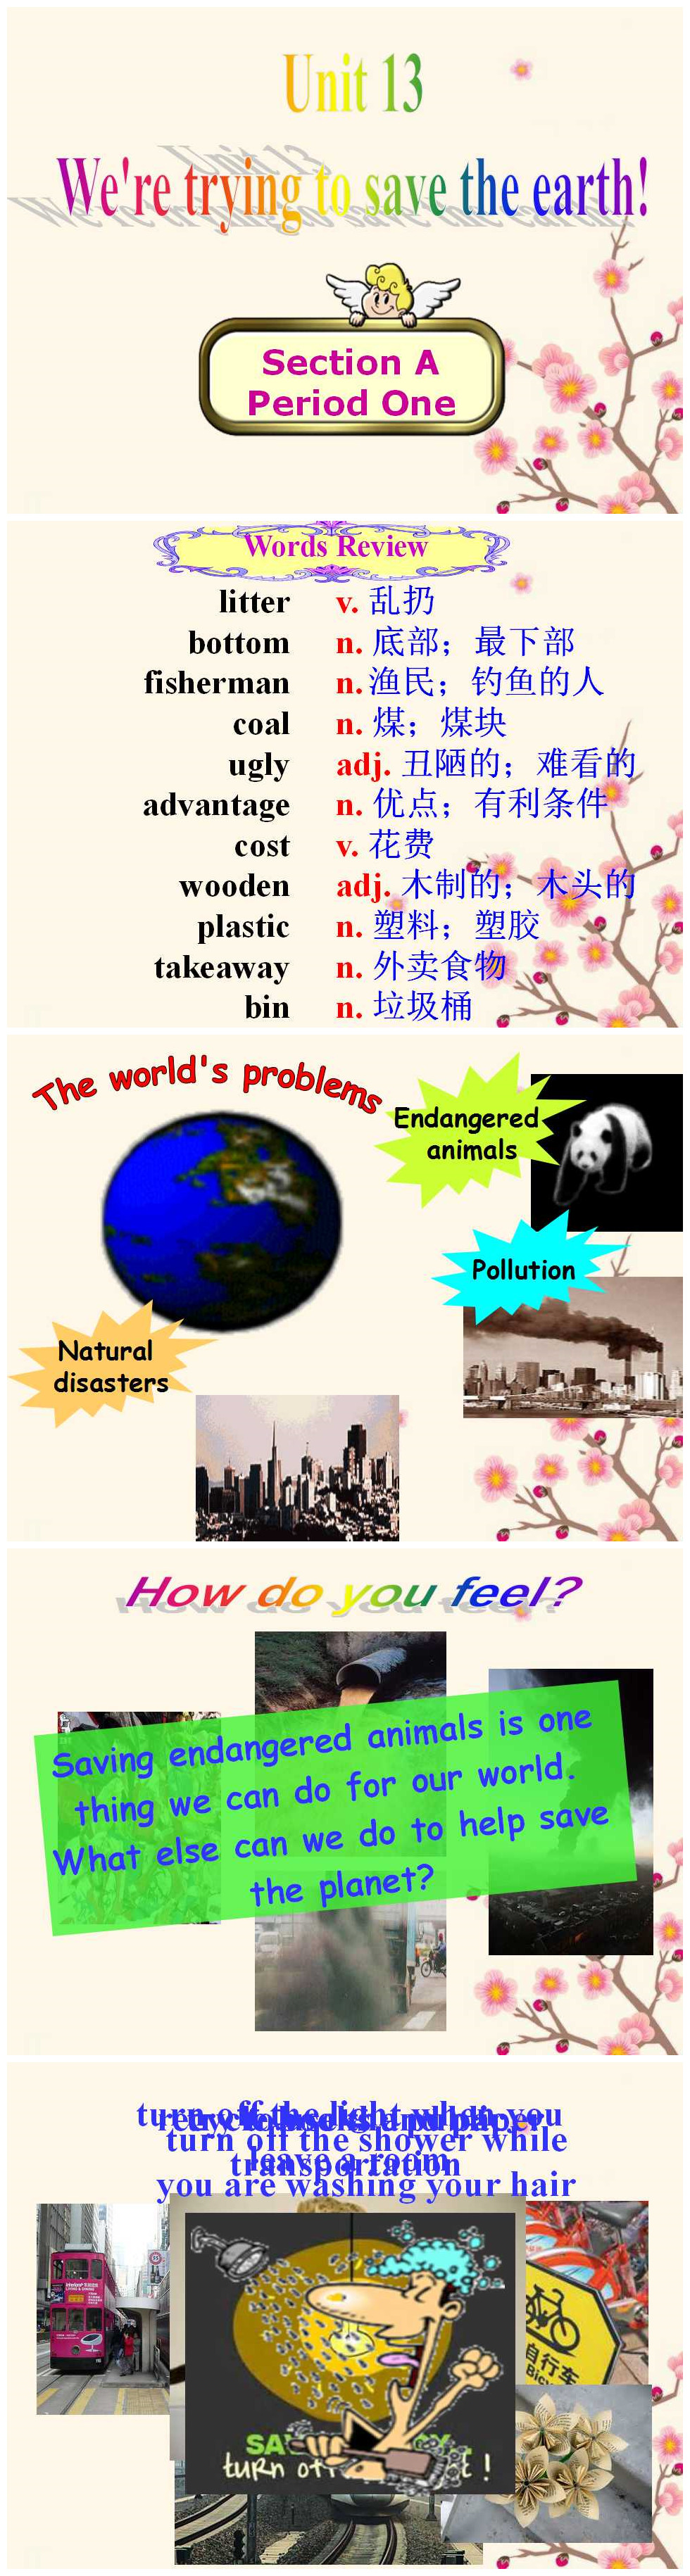 《We're trying to save the earth!》PPT课件6